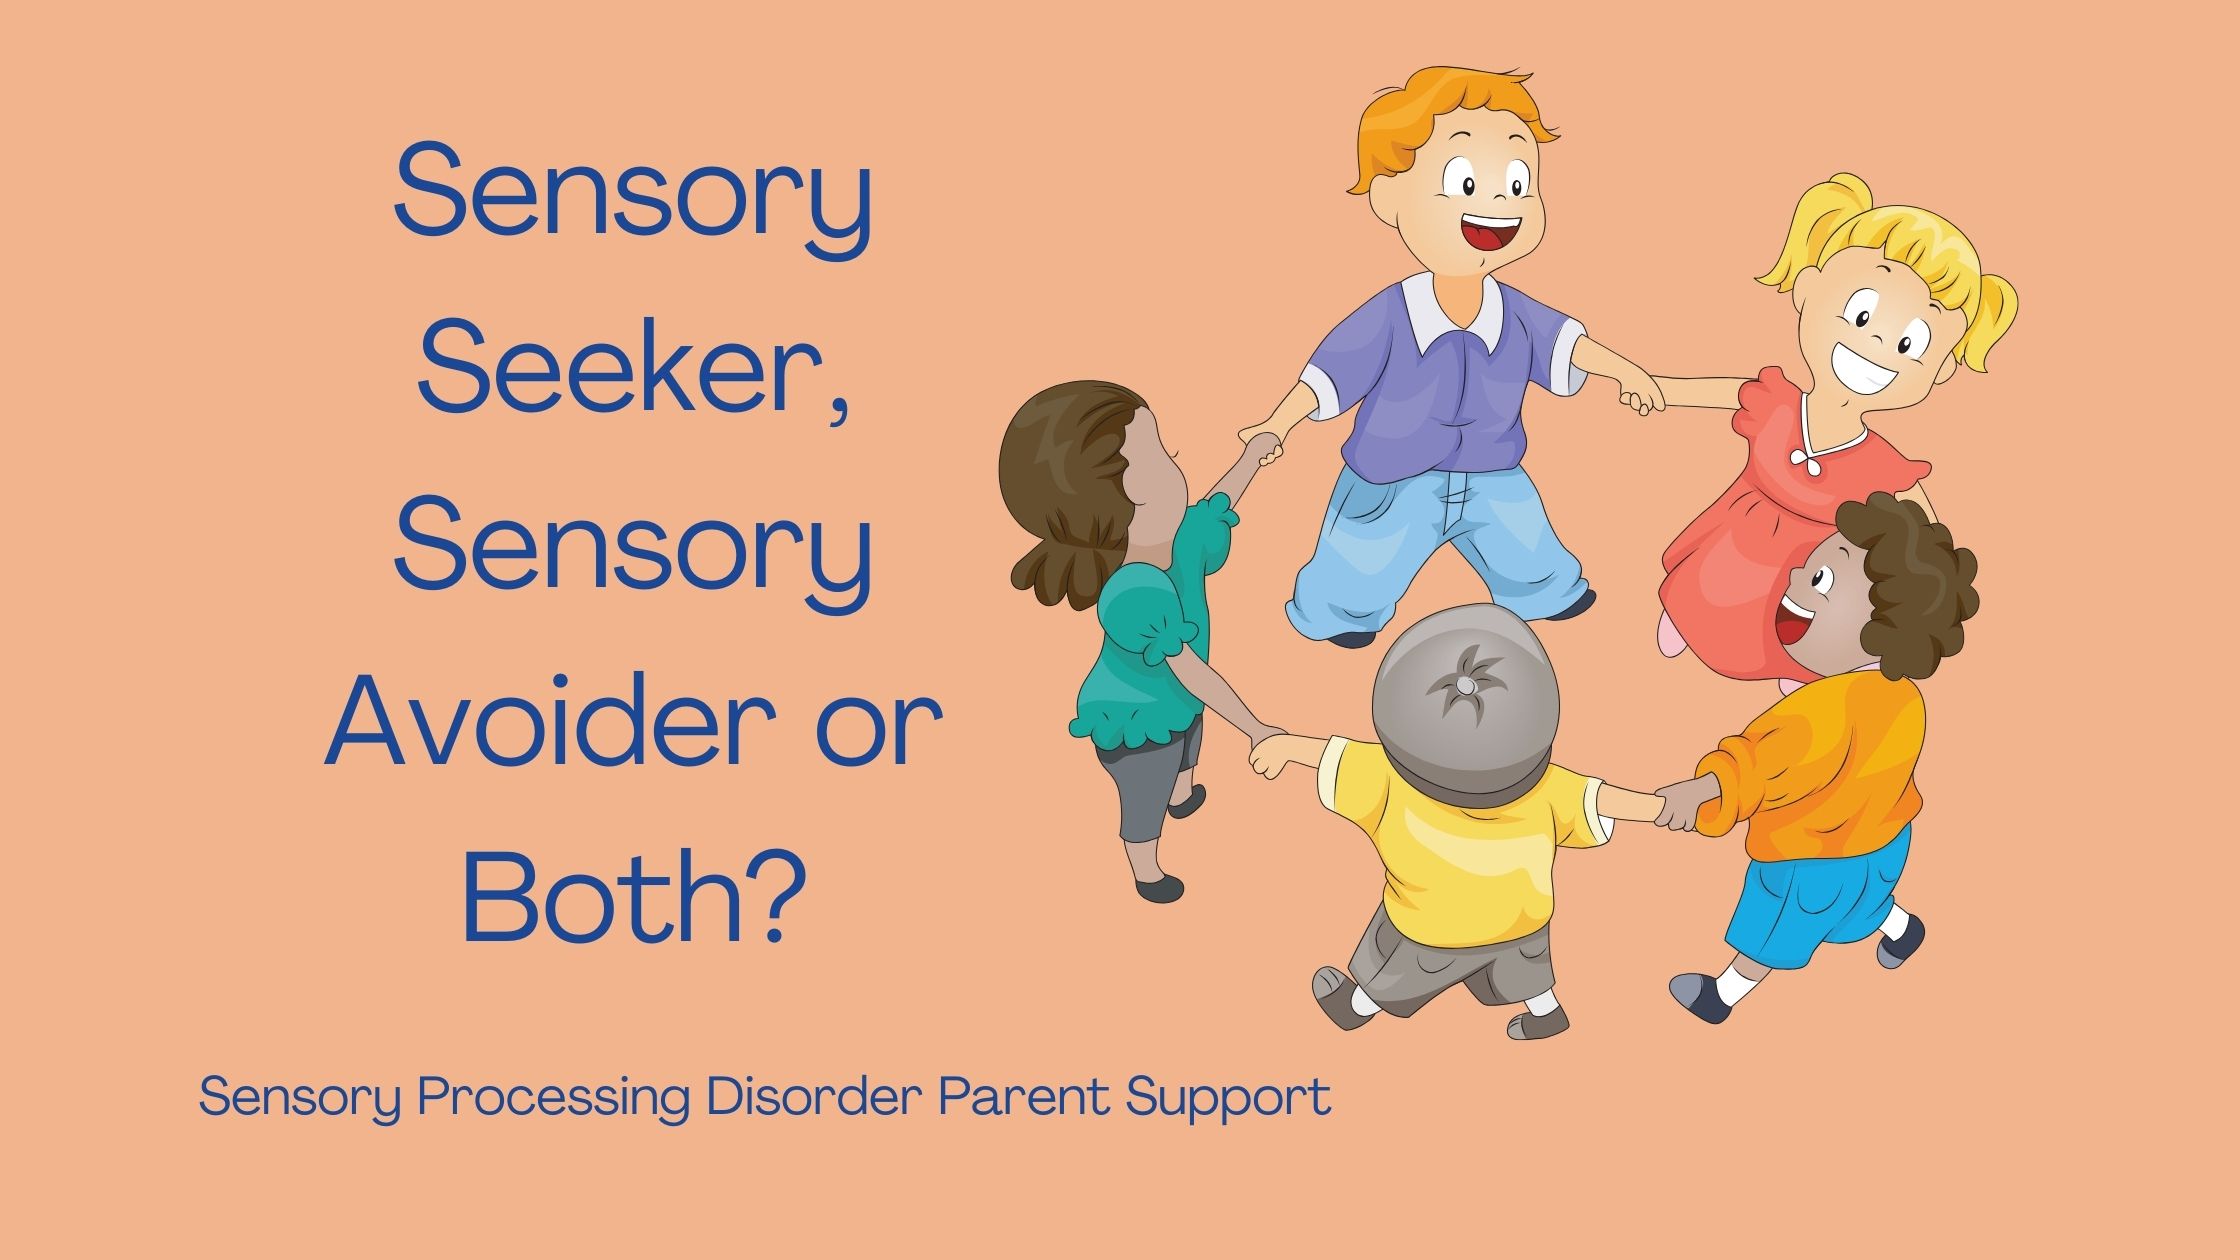 children with sensory processing disorder playing in a circle Sensory Seeker, Sensory Avoider or Both?